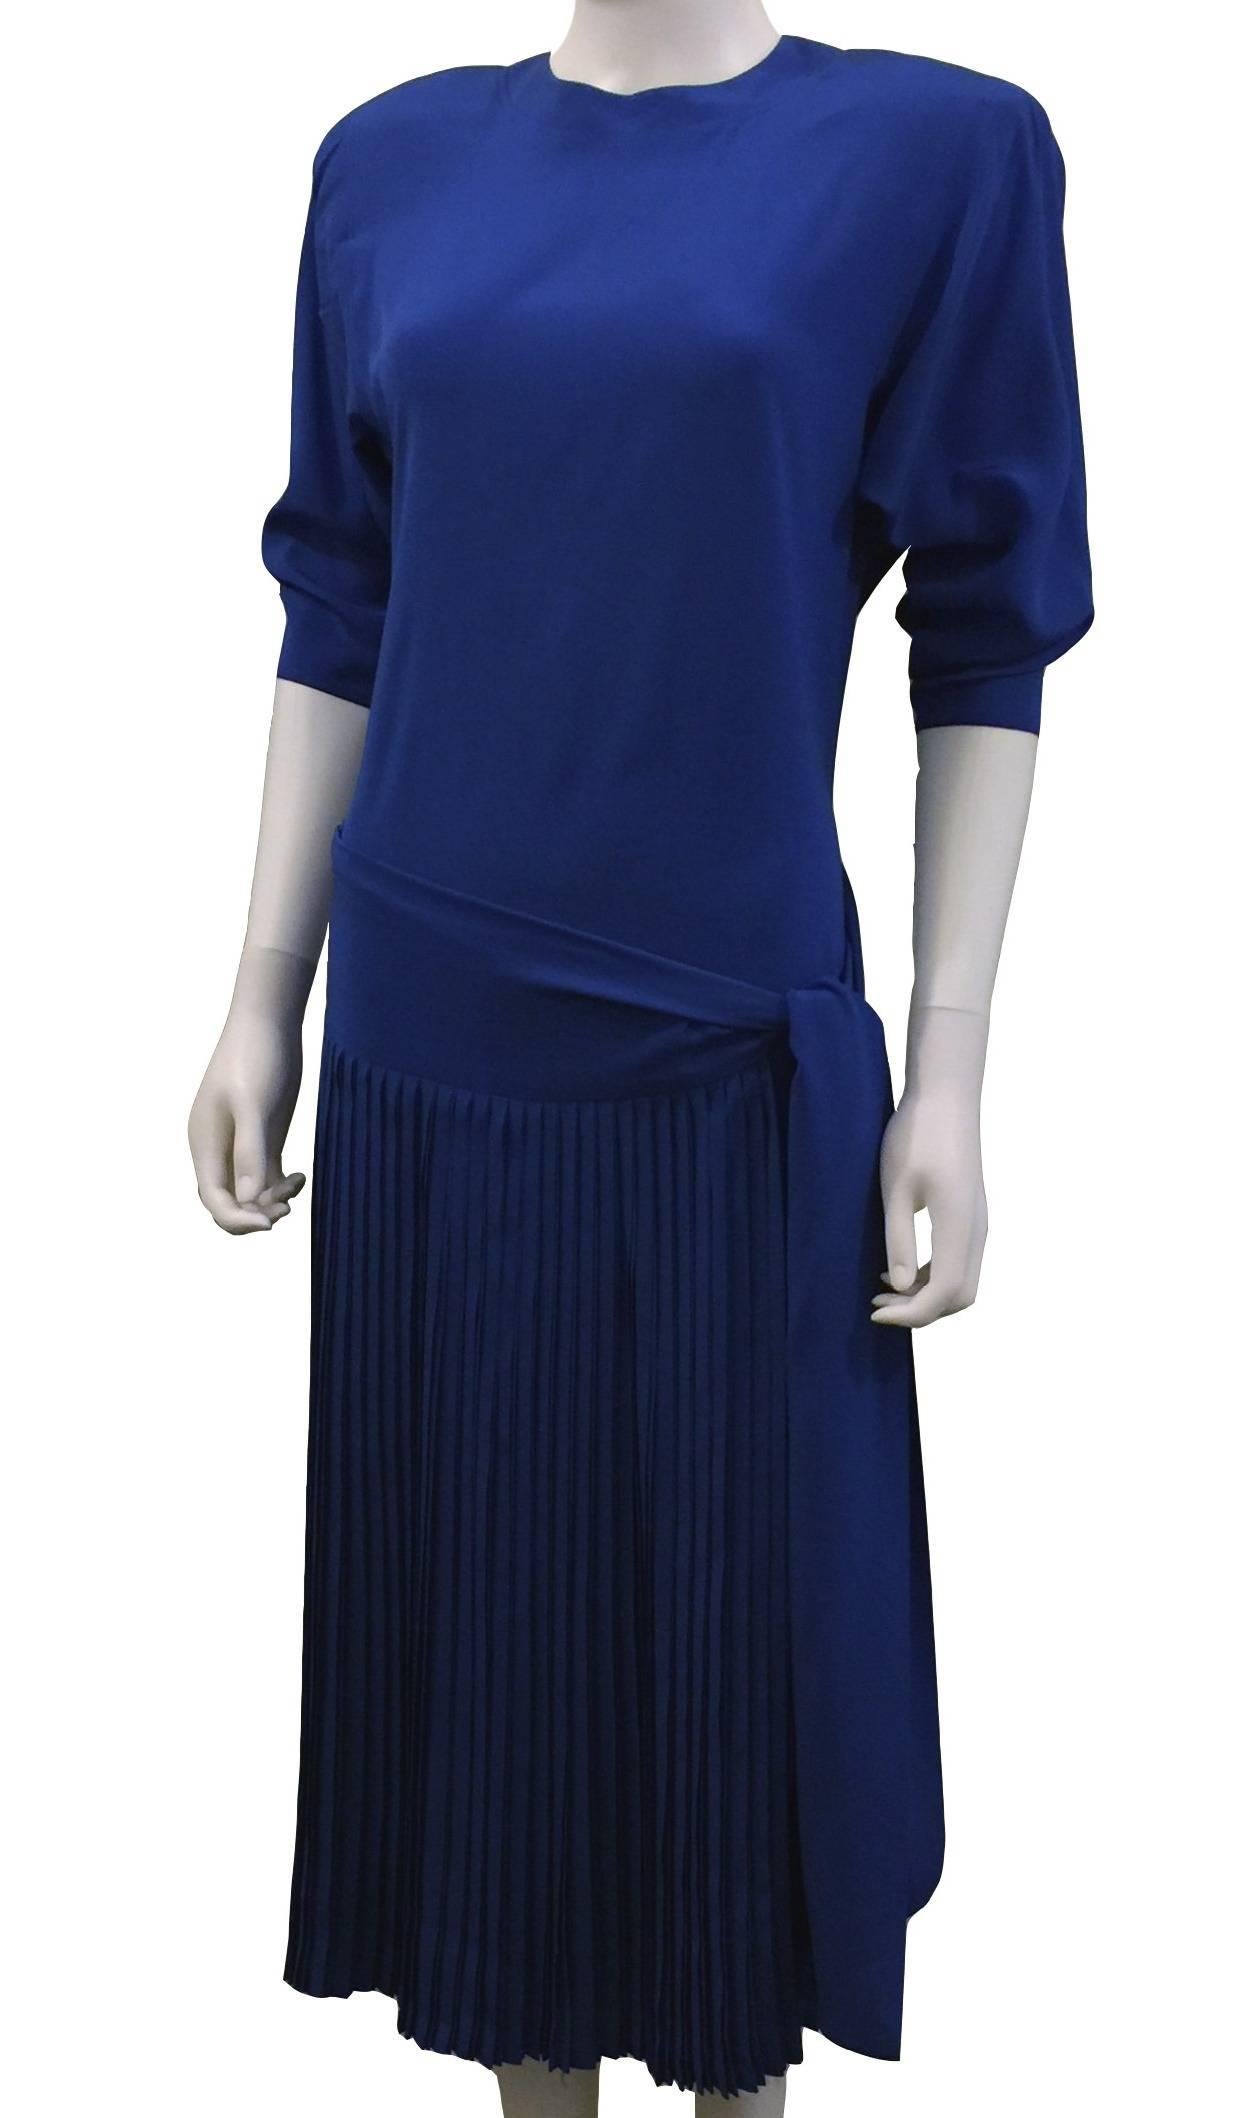 Size EU38
Gianfranco Ferré - Stunning blue silk two piece 100% Pure Silk Vintage Dress with Pleated Over-Skirt.  High quality silk. - ¾ sleeves. Size 38. Designed by Gianfranco Ferré .  Very Good condition.  This dress is from the Ferre